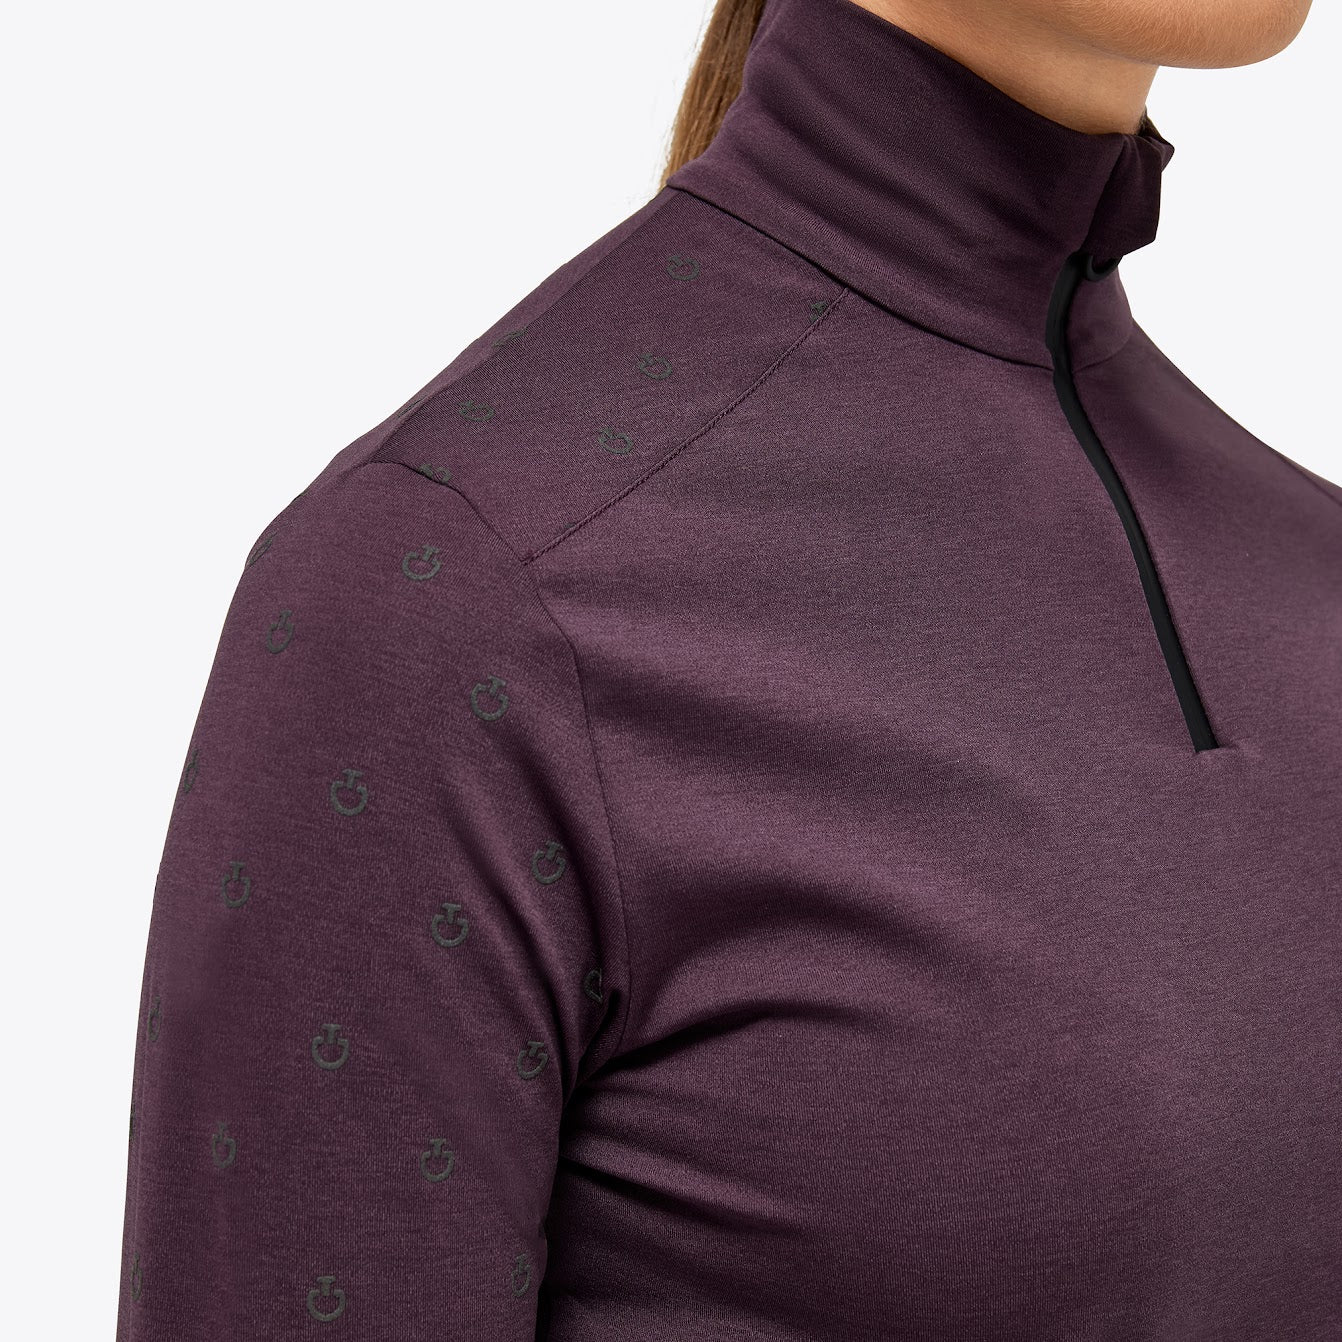 The Cavalleria Toscana plum Mini Flock Print Tech Wool Training Top is perfect for the season. The training top has a mini CT flock logo print on the shoulders and sleeves giving this top a modern look. Made from super soft bib stretch jersey it’s a must have this year!  matching items available. 